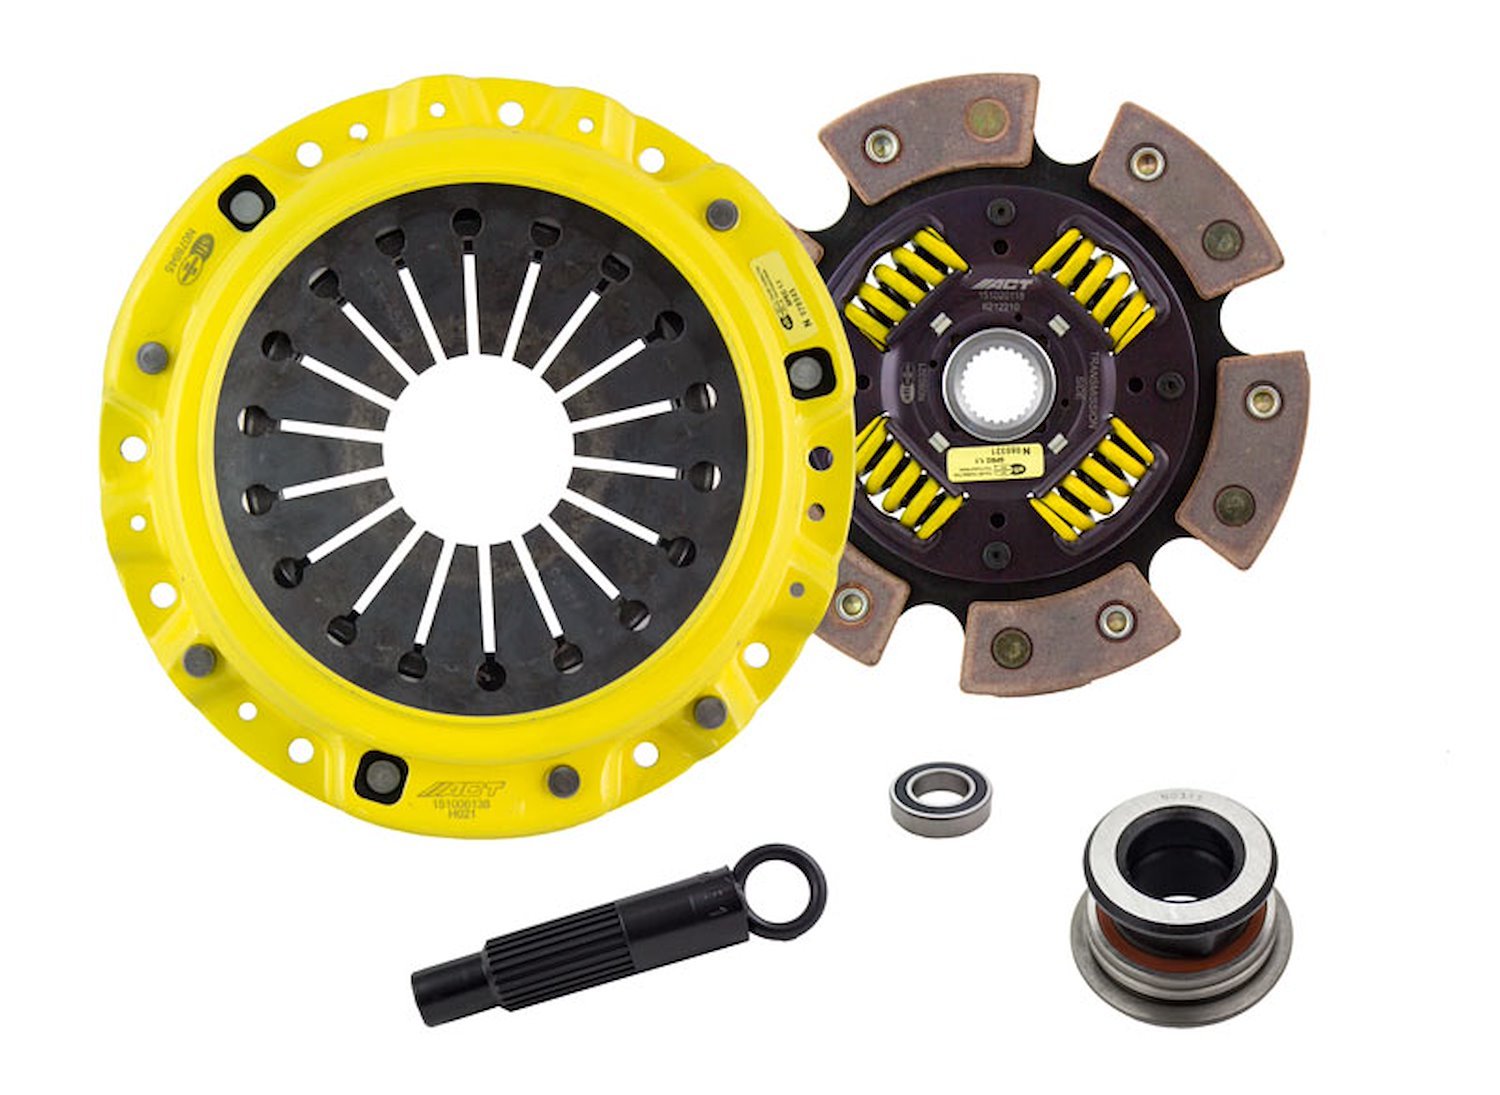 HD/Race Sprung 6-Pad Transmission Clutch Kit Fits Select Acura/Honda